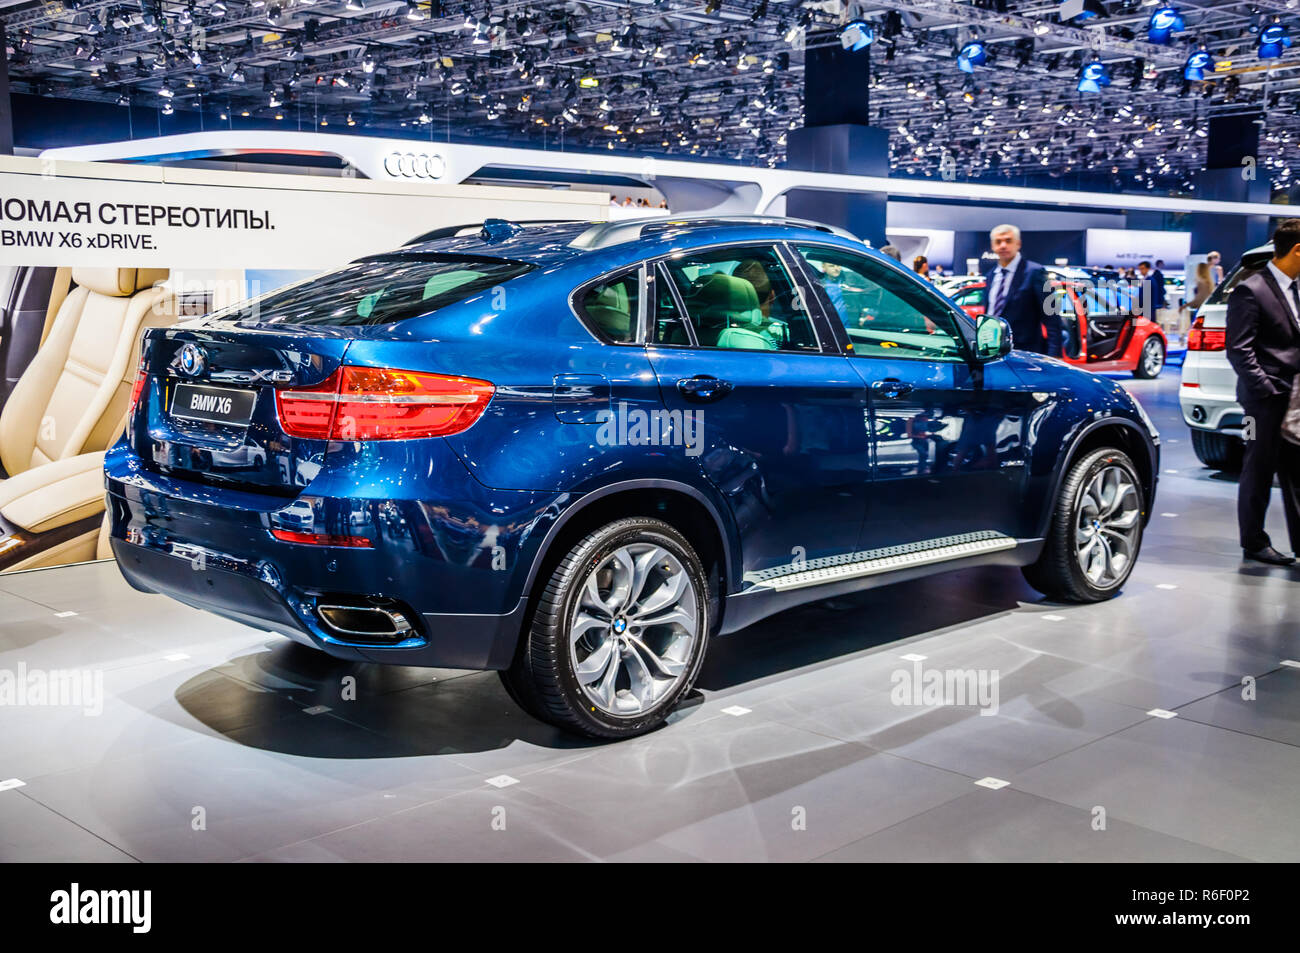 https://c8.alamy.com/comp/R6F0P2/moscow-russia-aug-2012-bmw-x6-e71-presented-as-world-premiere-at-the-16th-mias-moscow-international-automobile-salon-on-august-30-2012-in-mosco-R6F0P2.jpg